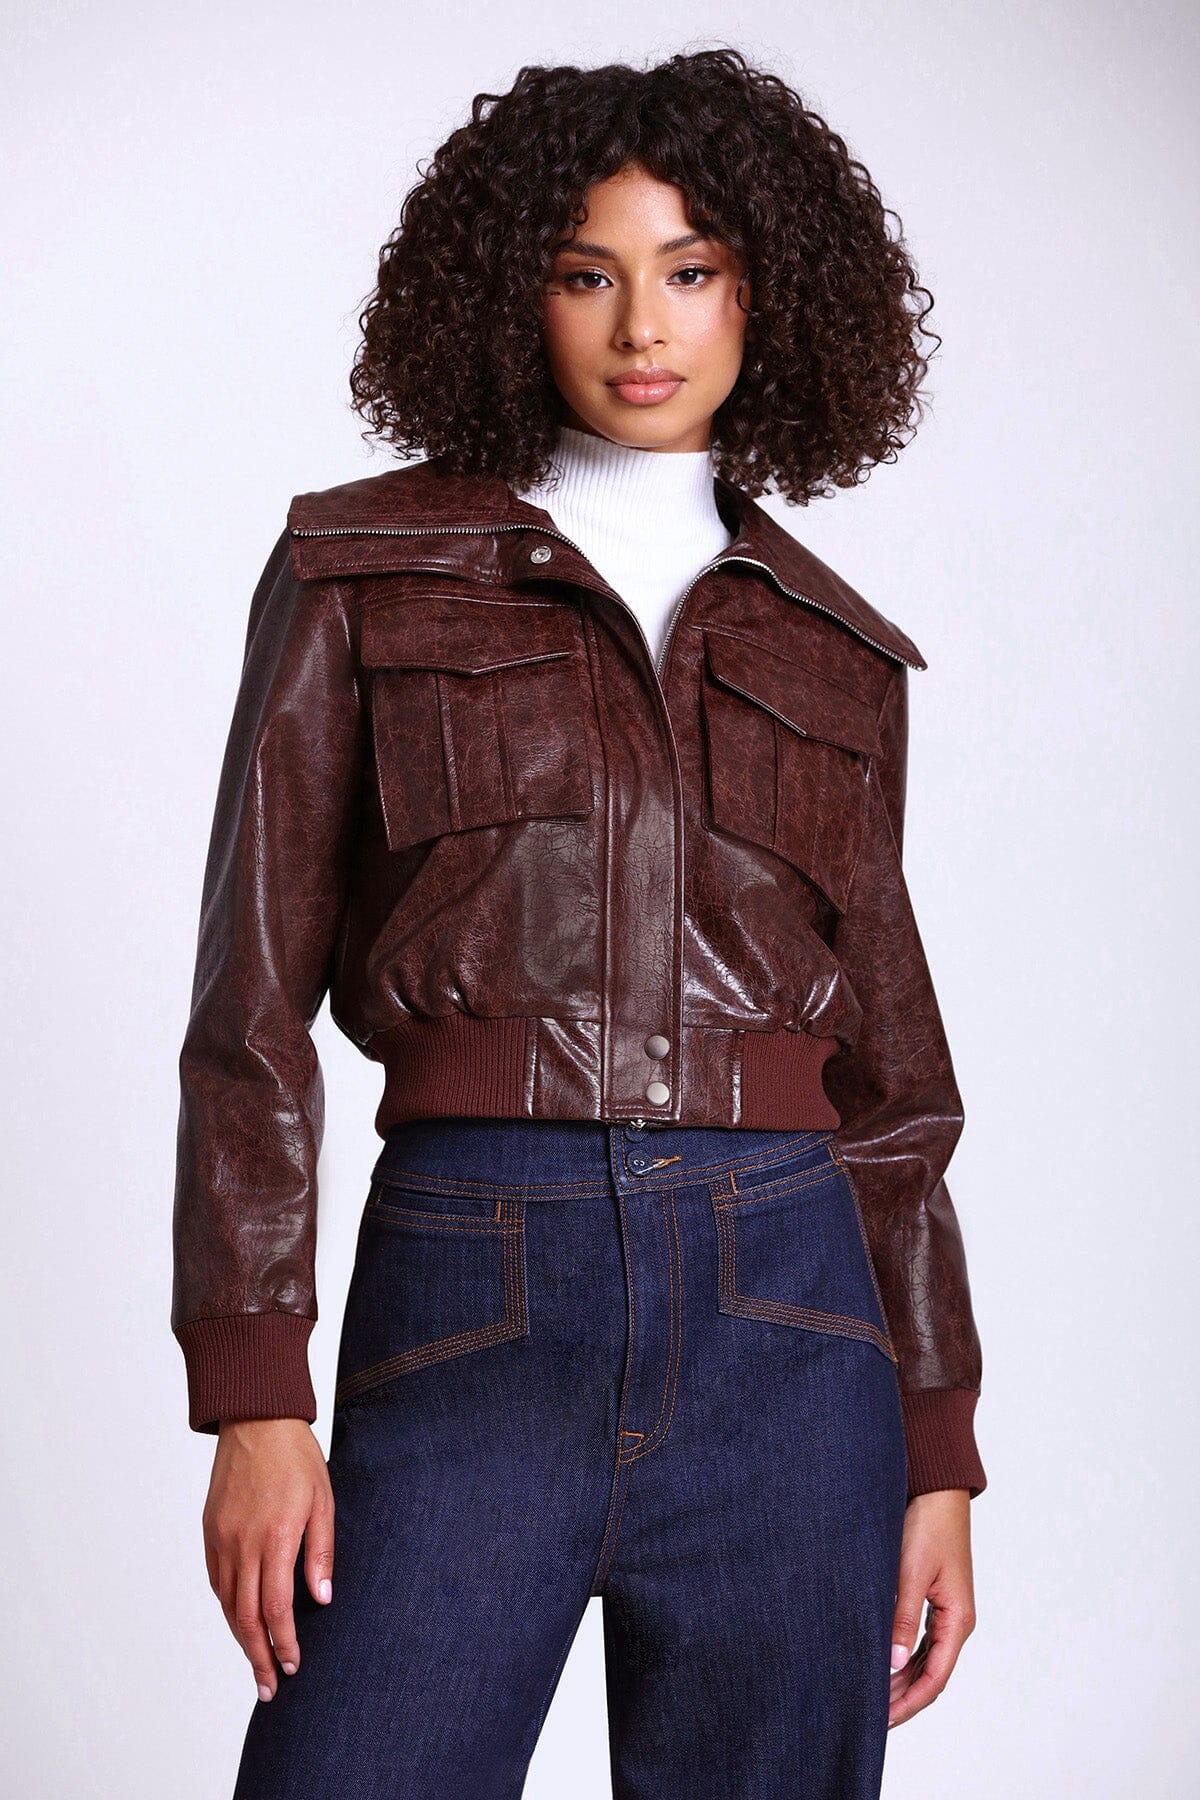 Tobacco brown faux ever leather cropped aviator bomber jacket coat - figure flattering work appropriate jackets for women